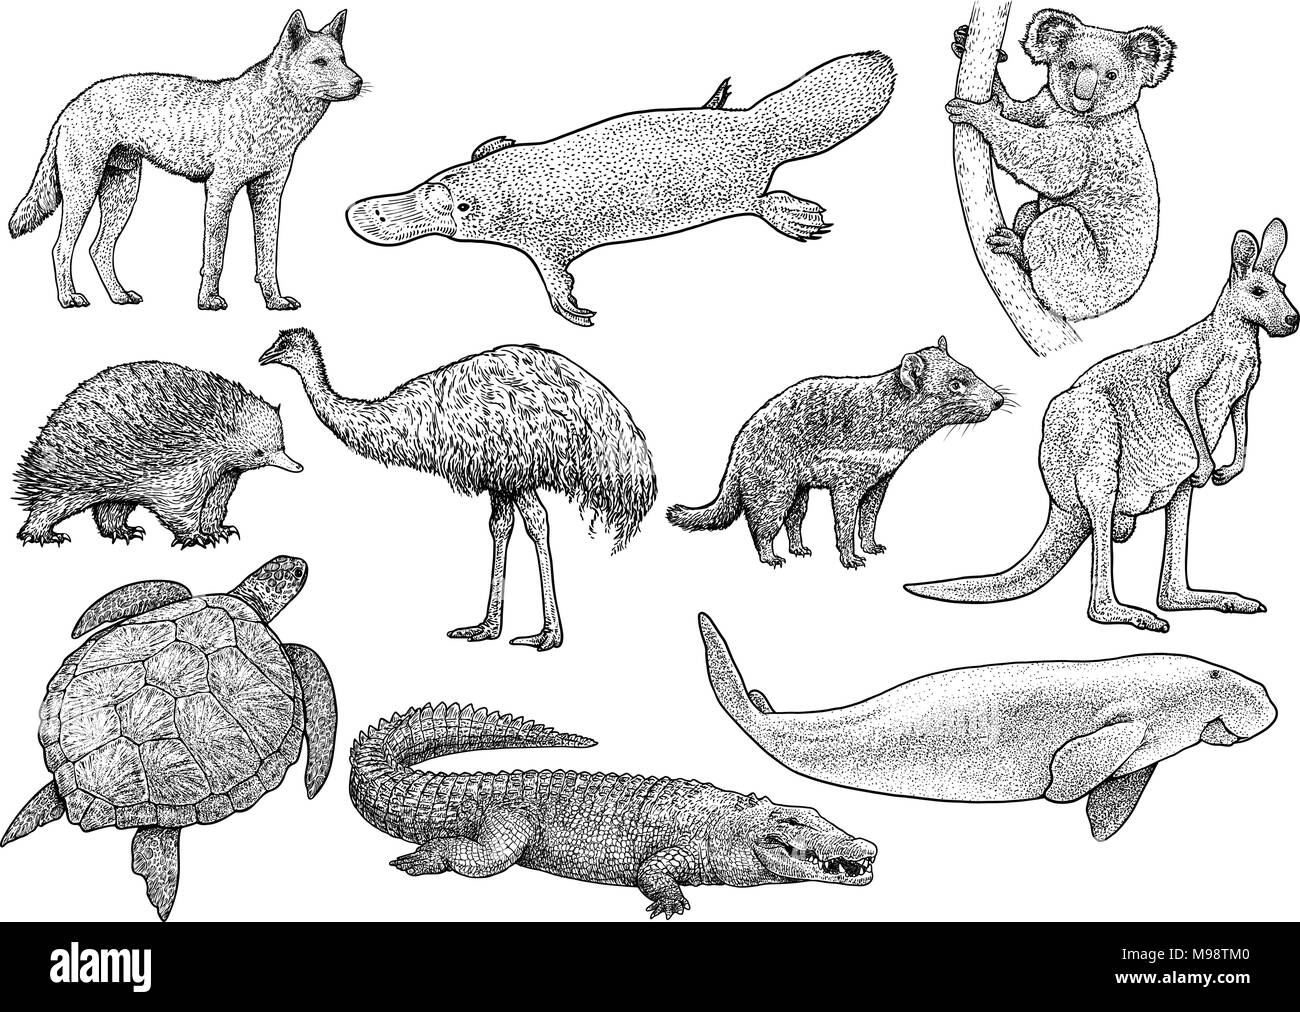 Australian animal collection illustration, drawing, engraving, ink, line art, vector Stock Vector